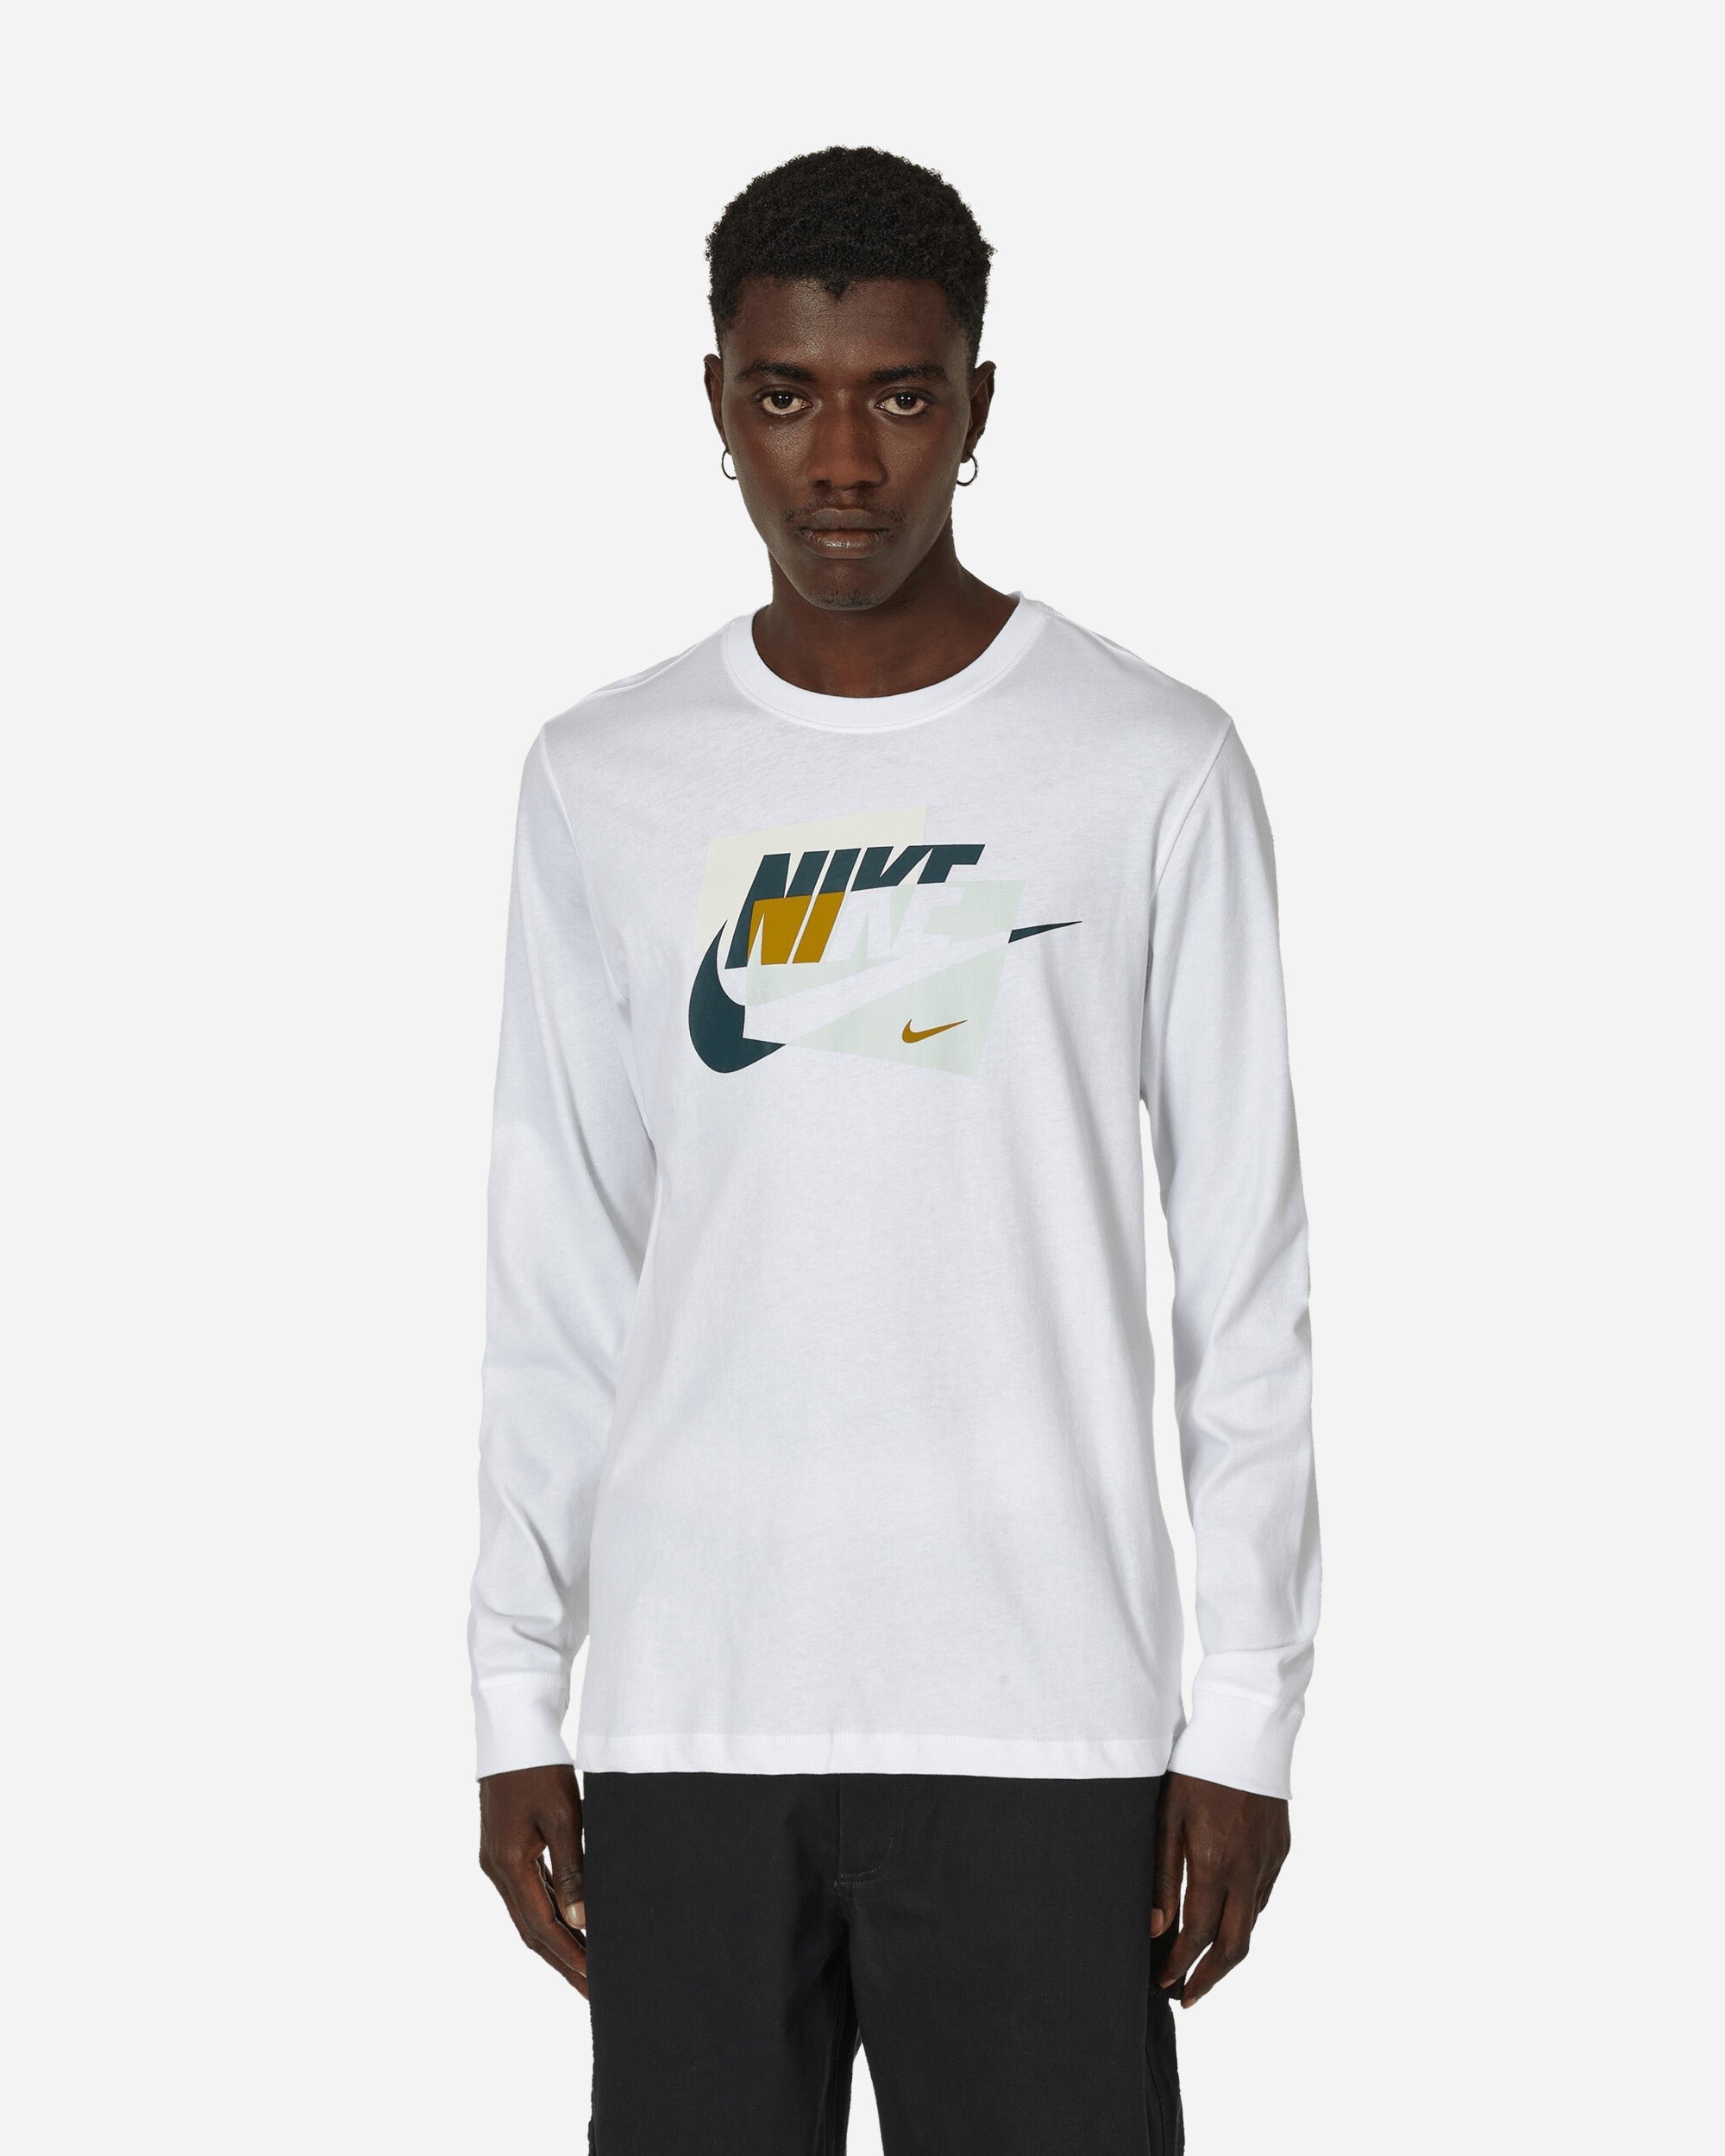 FW Connect Longsleeve T-Shirt White